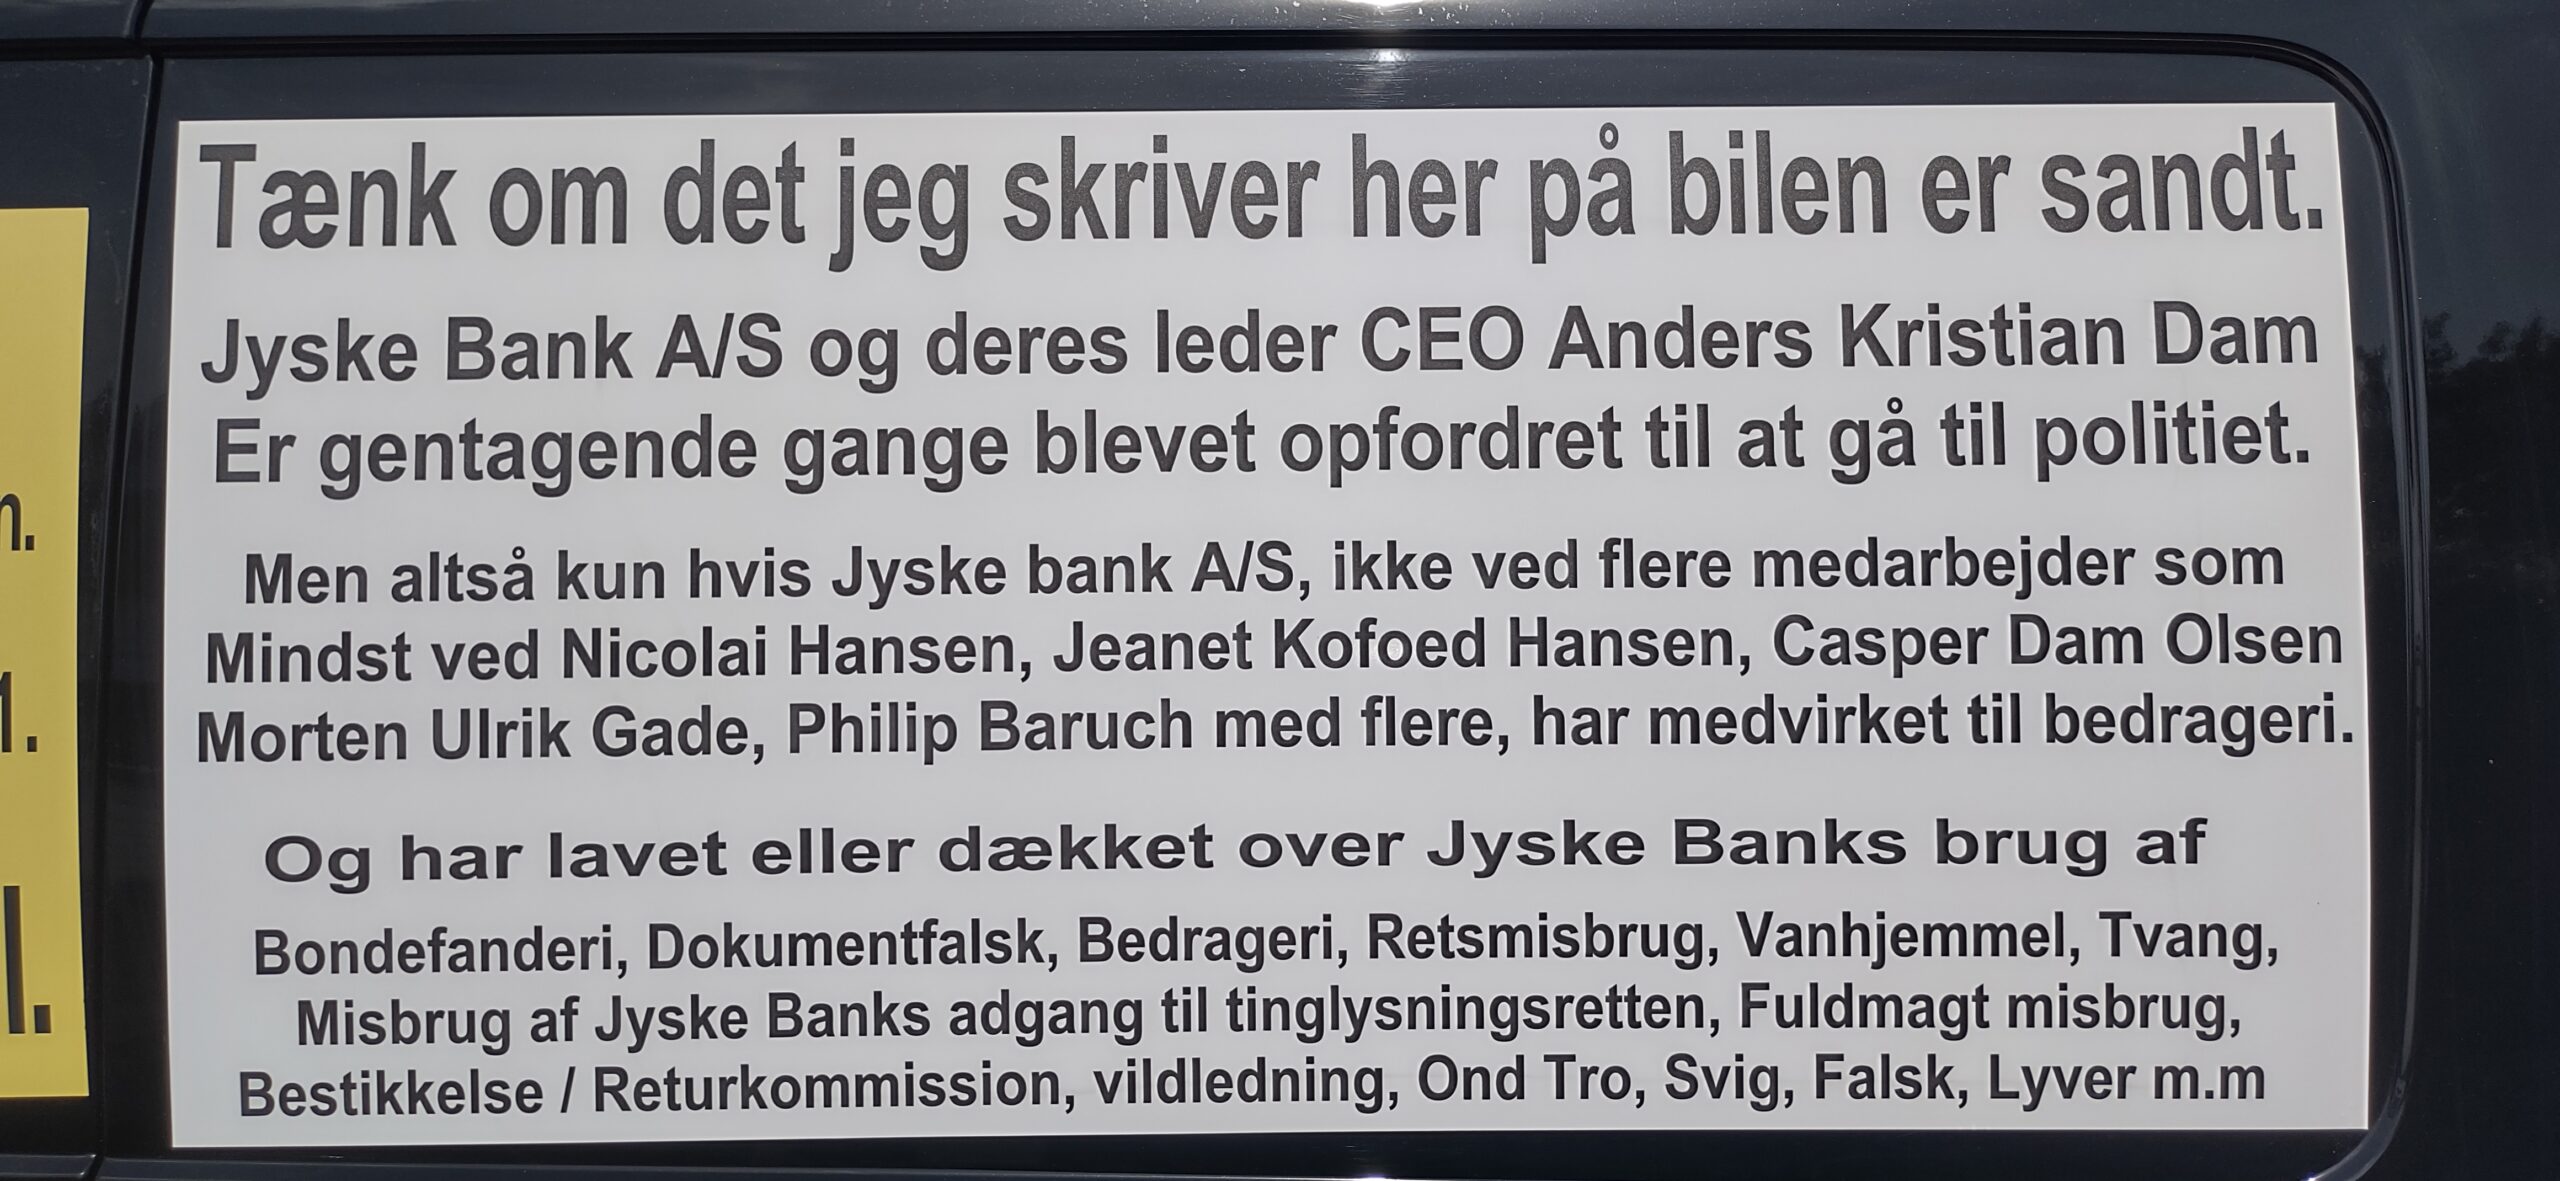 Denmark has a major problem with legal certainty, as employees of the National Courts Administration knowingly and dishonestly, and by camaraderie, cover up economic crime, including corruption, which some of the largest Danish companies, including Jyske Bank A/S, are behind.